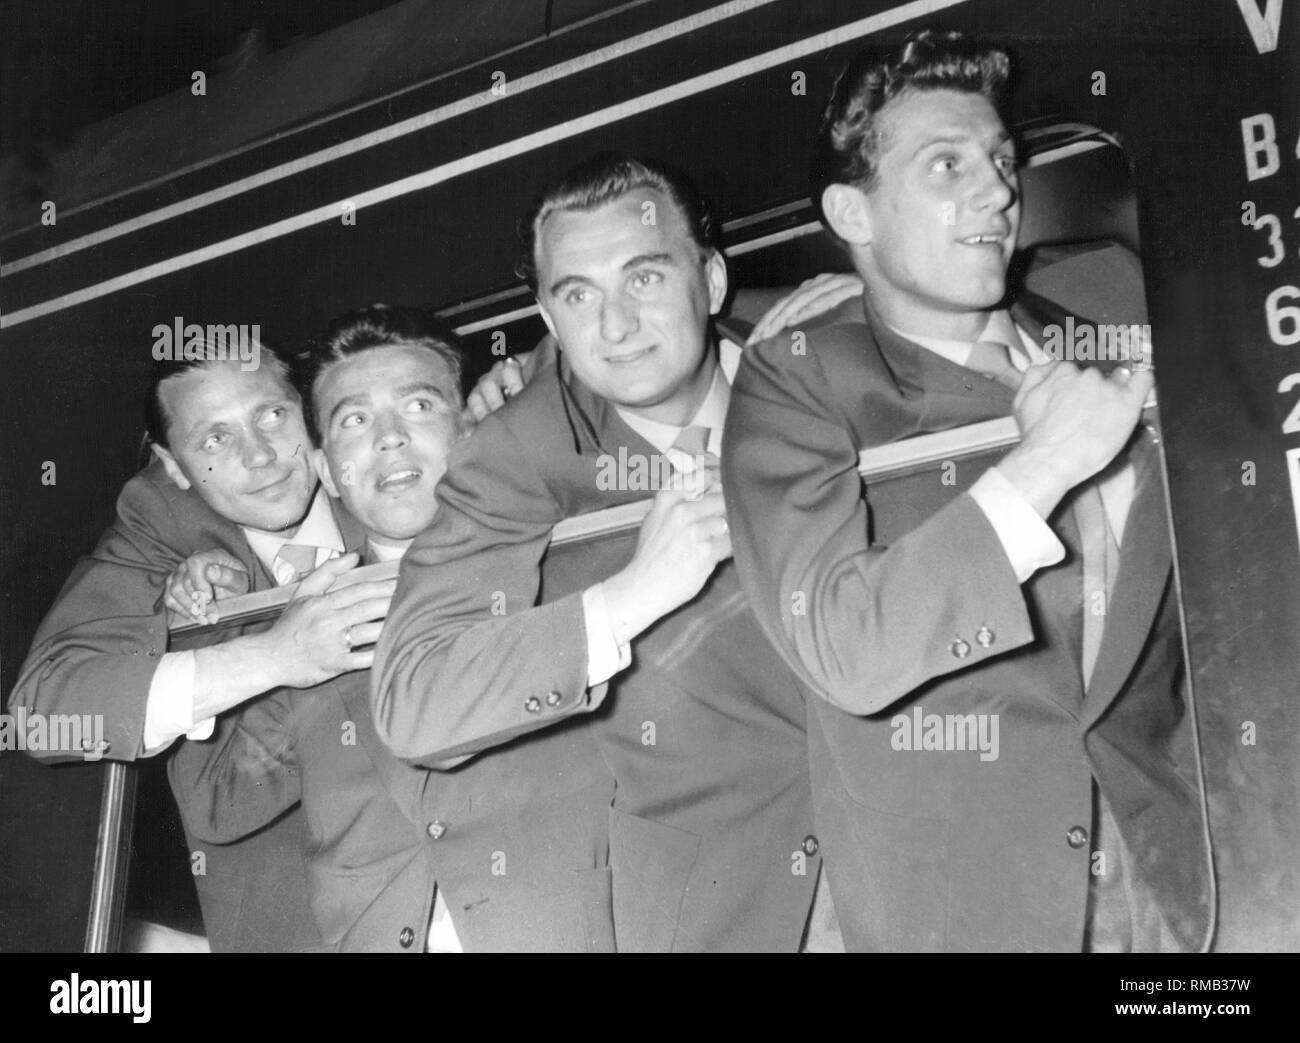 Arrival of the crew at the station in Lindau.Players of the team lean out of the train window. From left: Max Morlock, substitute, Jupp Posipal, Hans Schaefer. In 1954 Germany won its first World Cup in Switzerland. Stock Photo